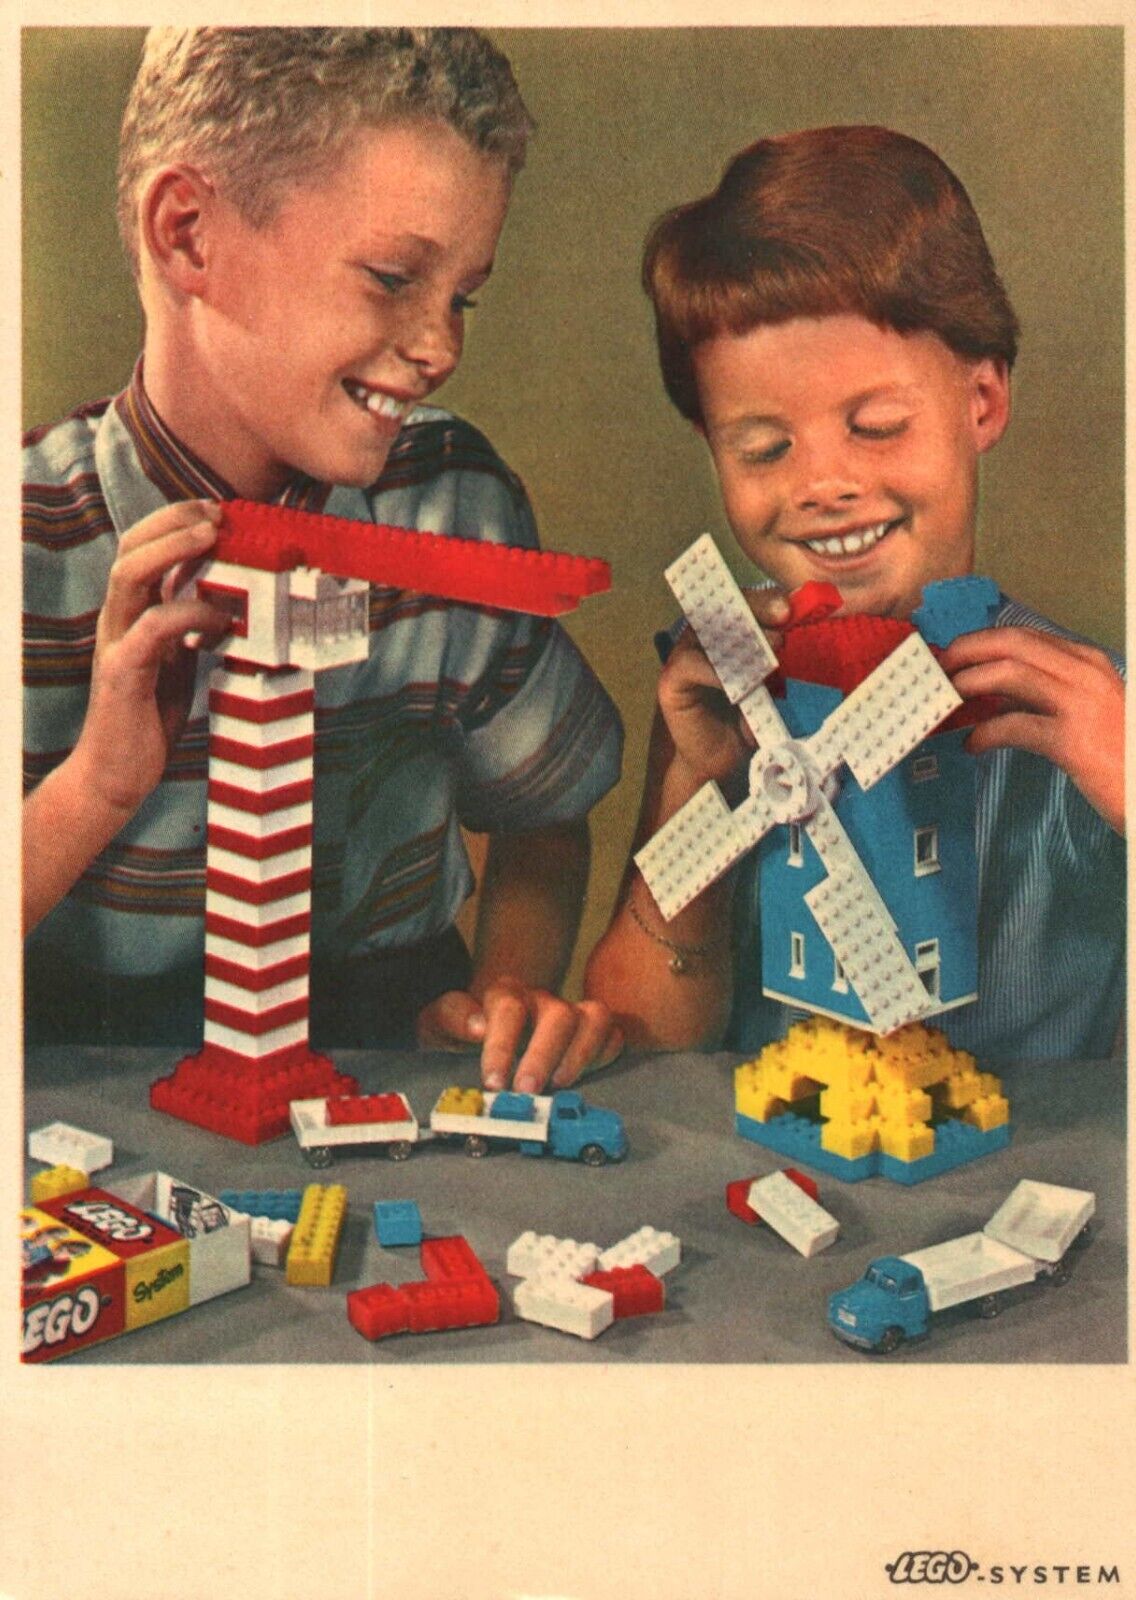 Lego System Advertising Card Children Play w/ Legos Vintage Early 60's Size 4x6